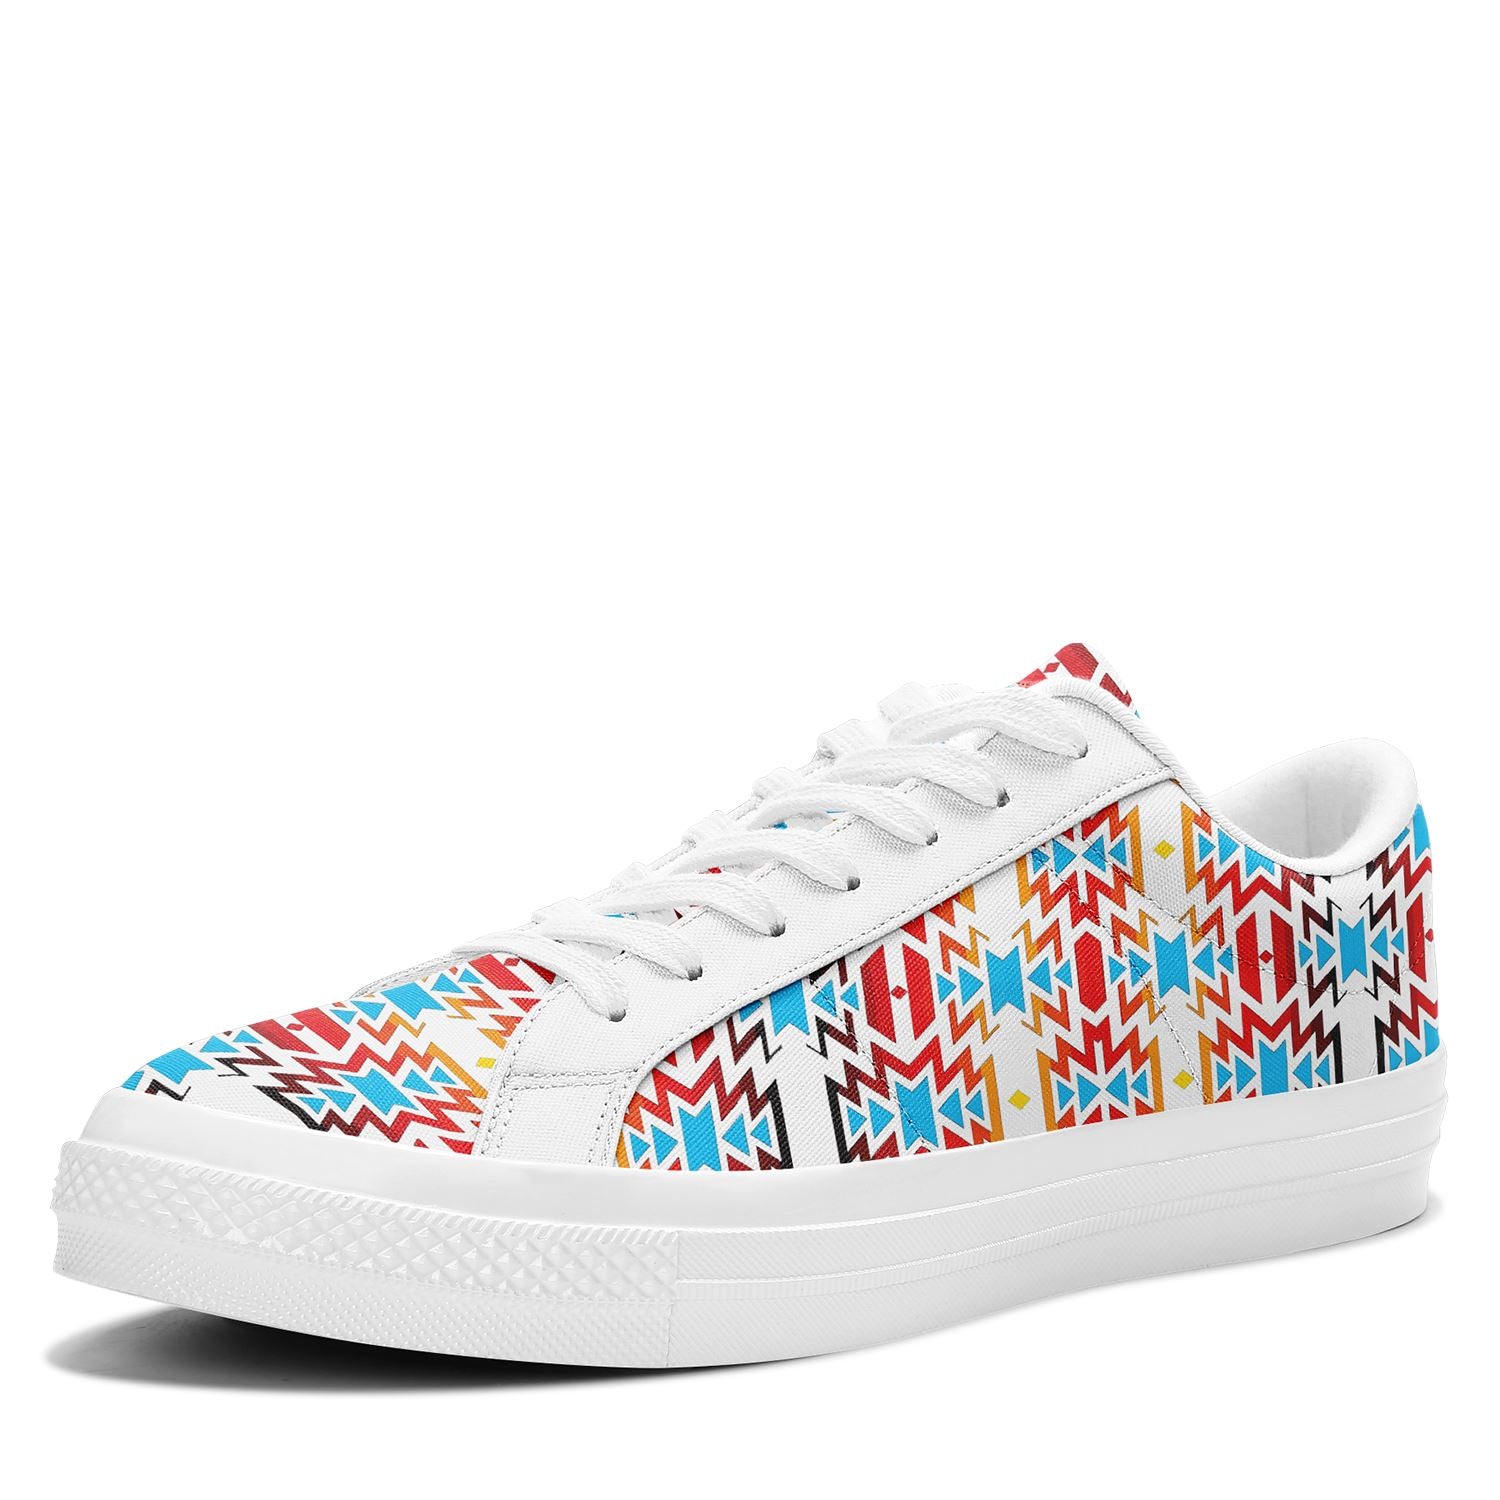 Fire Colors and Sky Aapisi Low Top Canvas Shoes White Sole 49 Dzine 